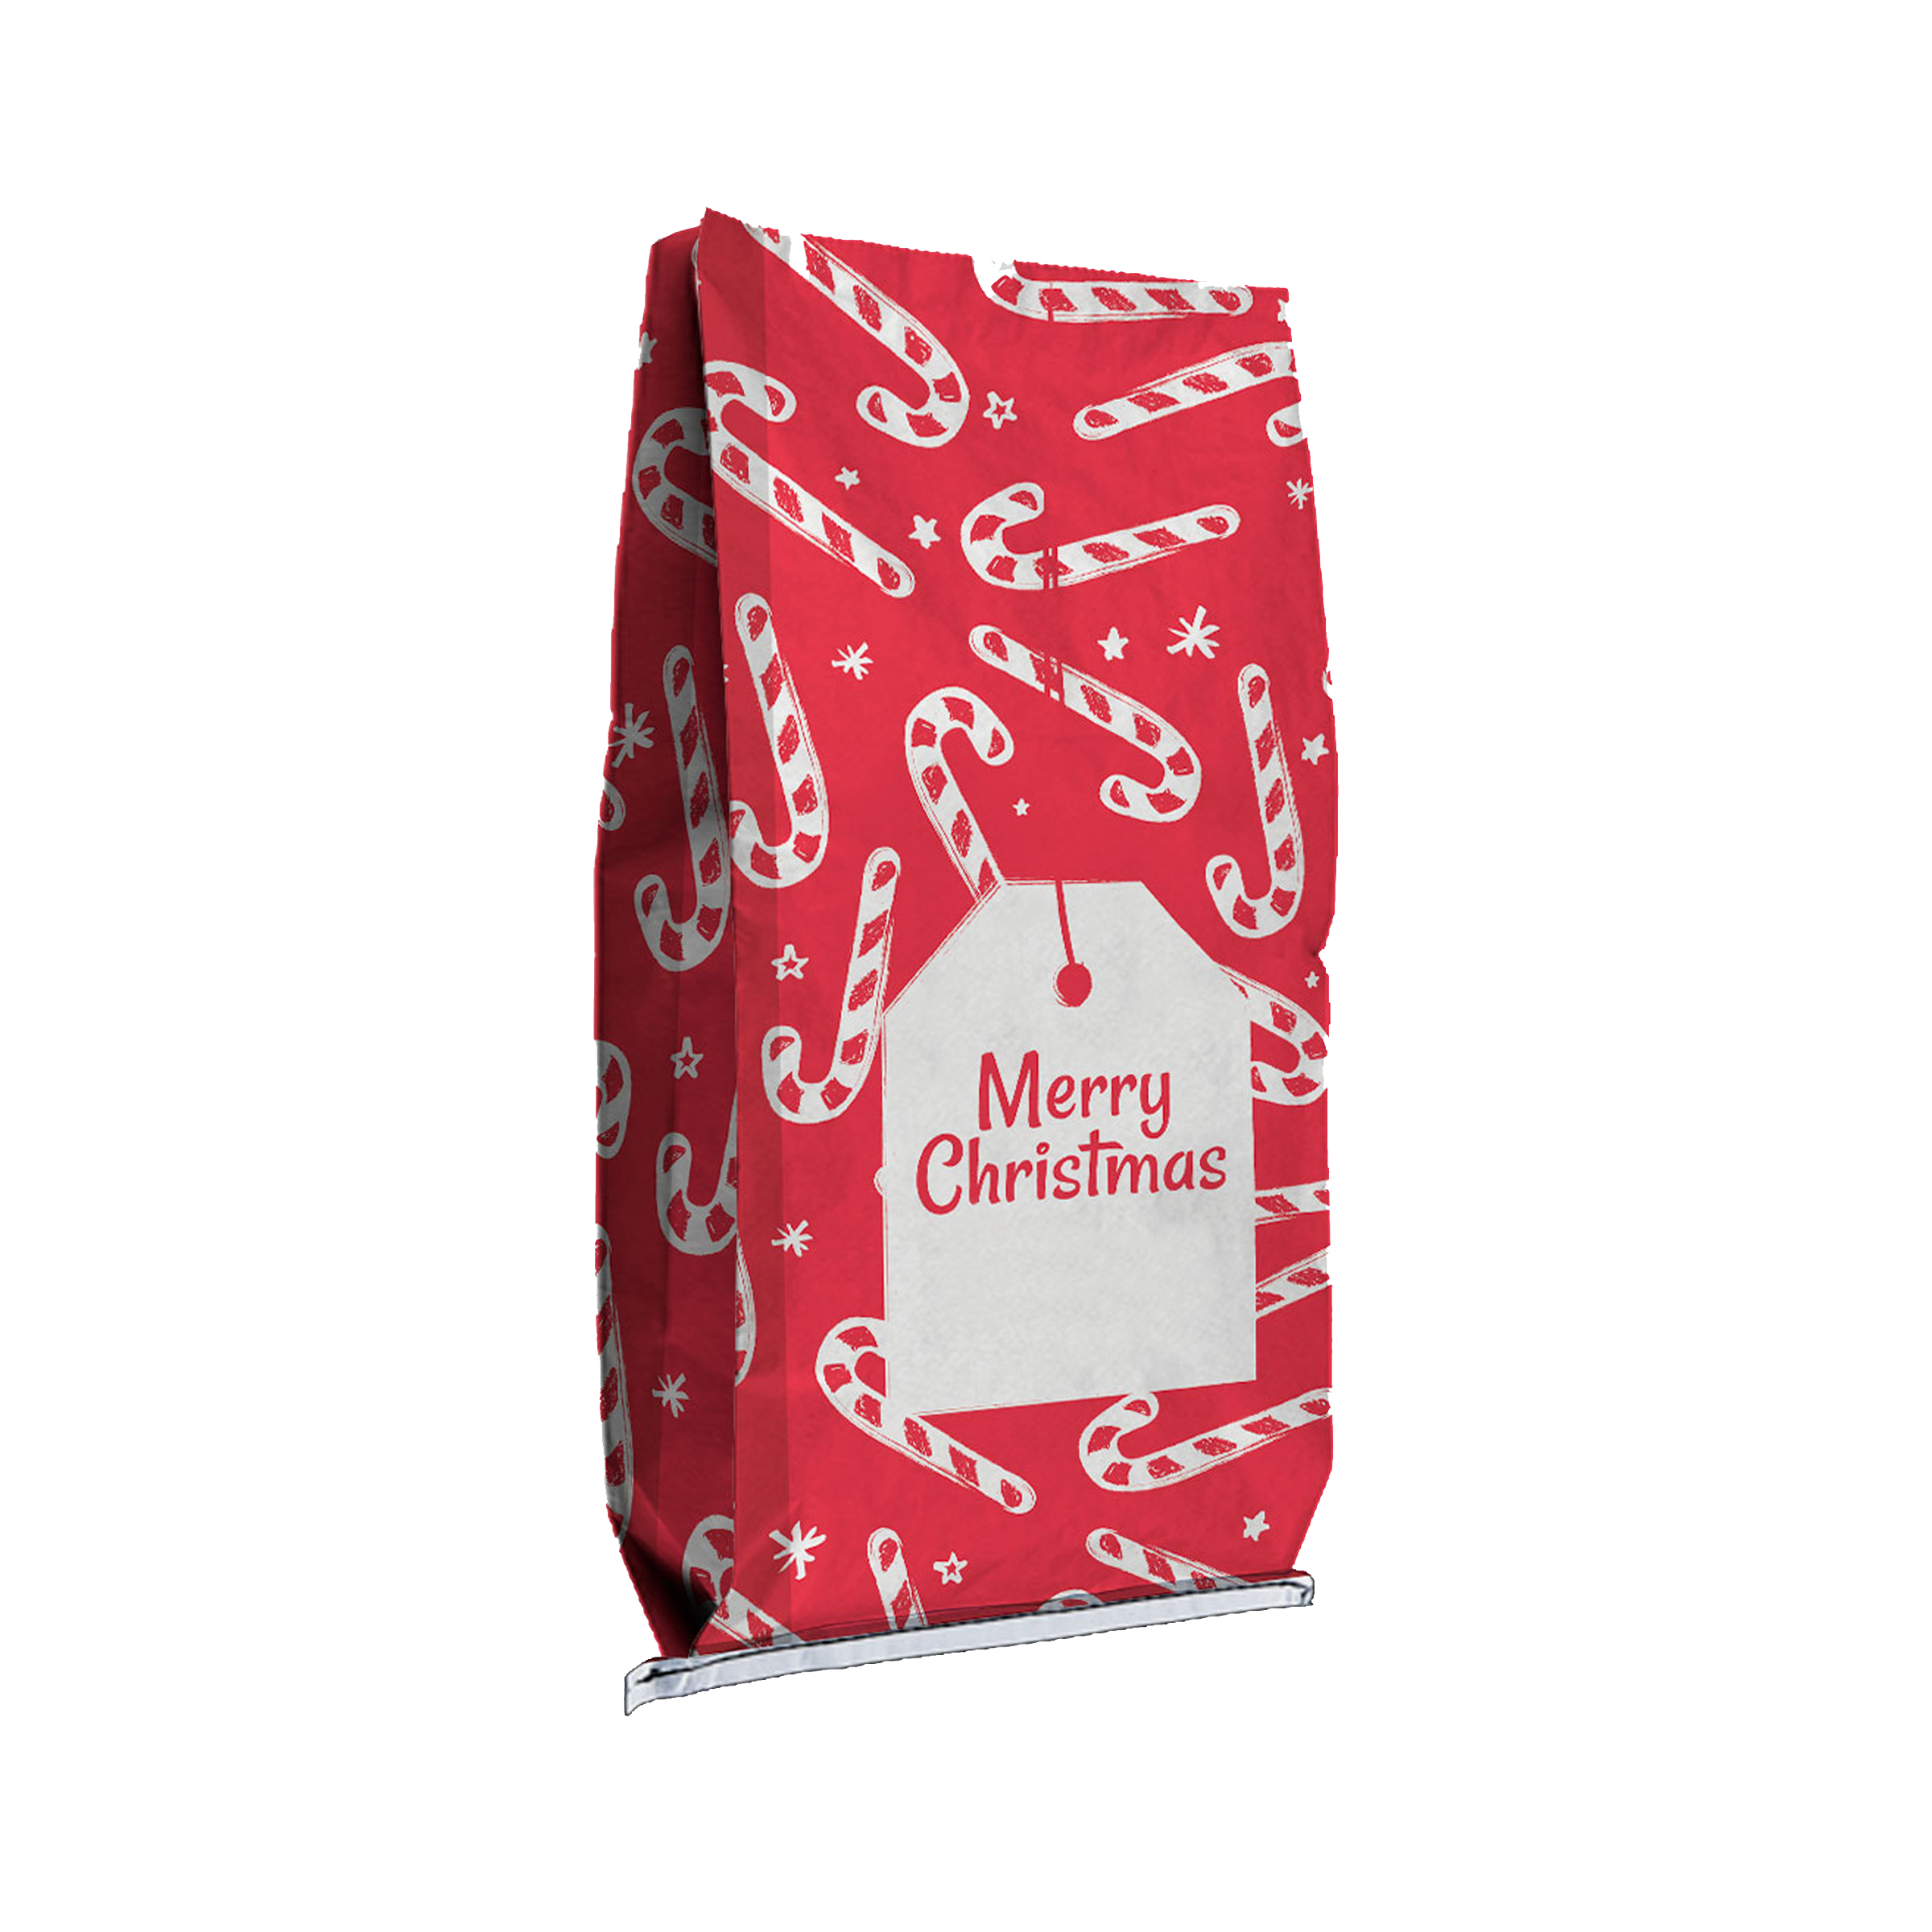 Candy Cane Paper Sack